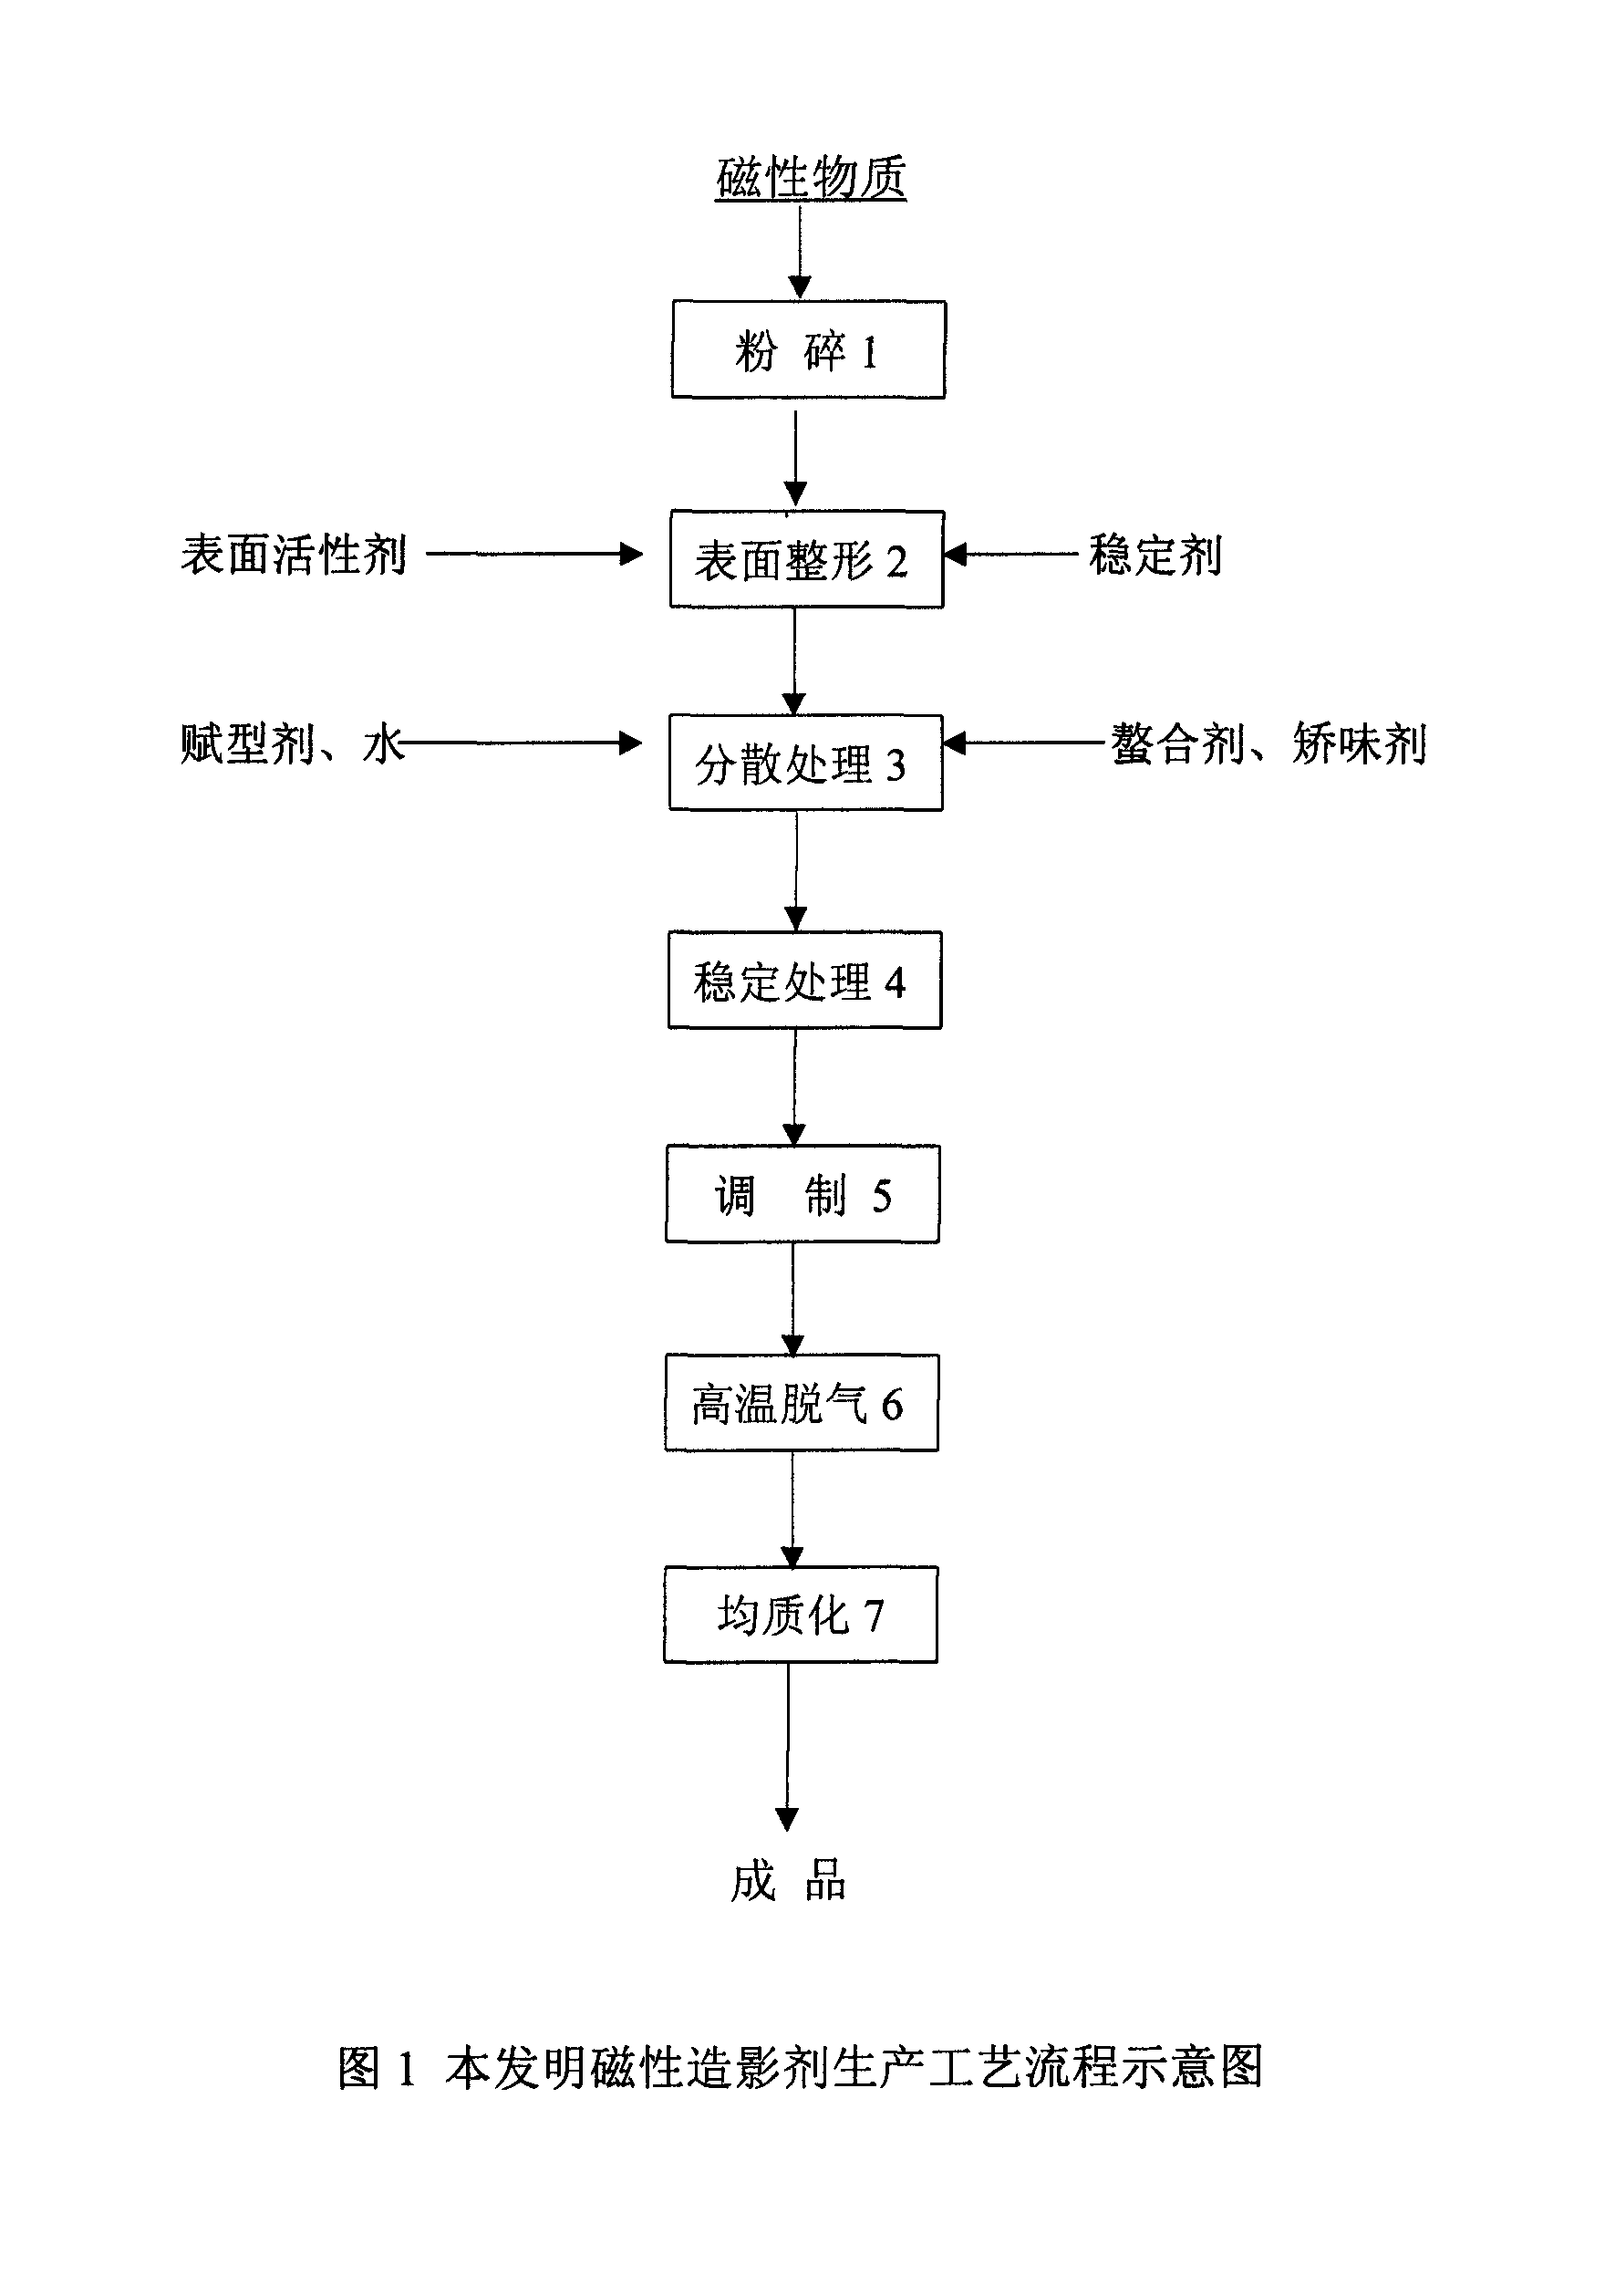 Magnetic contrast medium composition and its preparing method